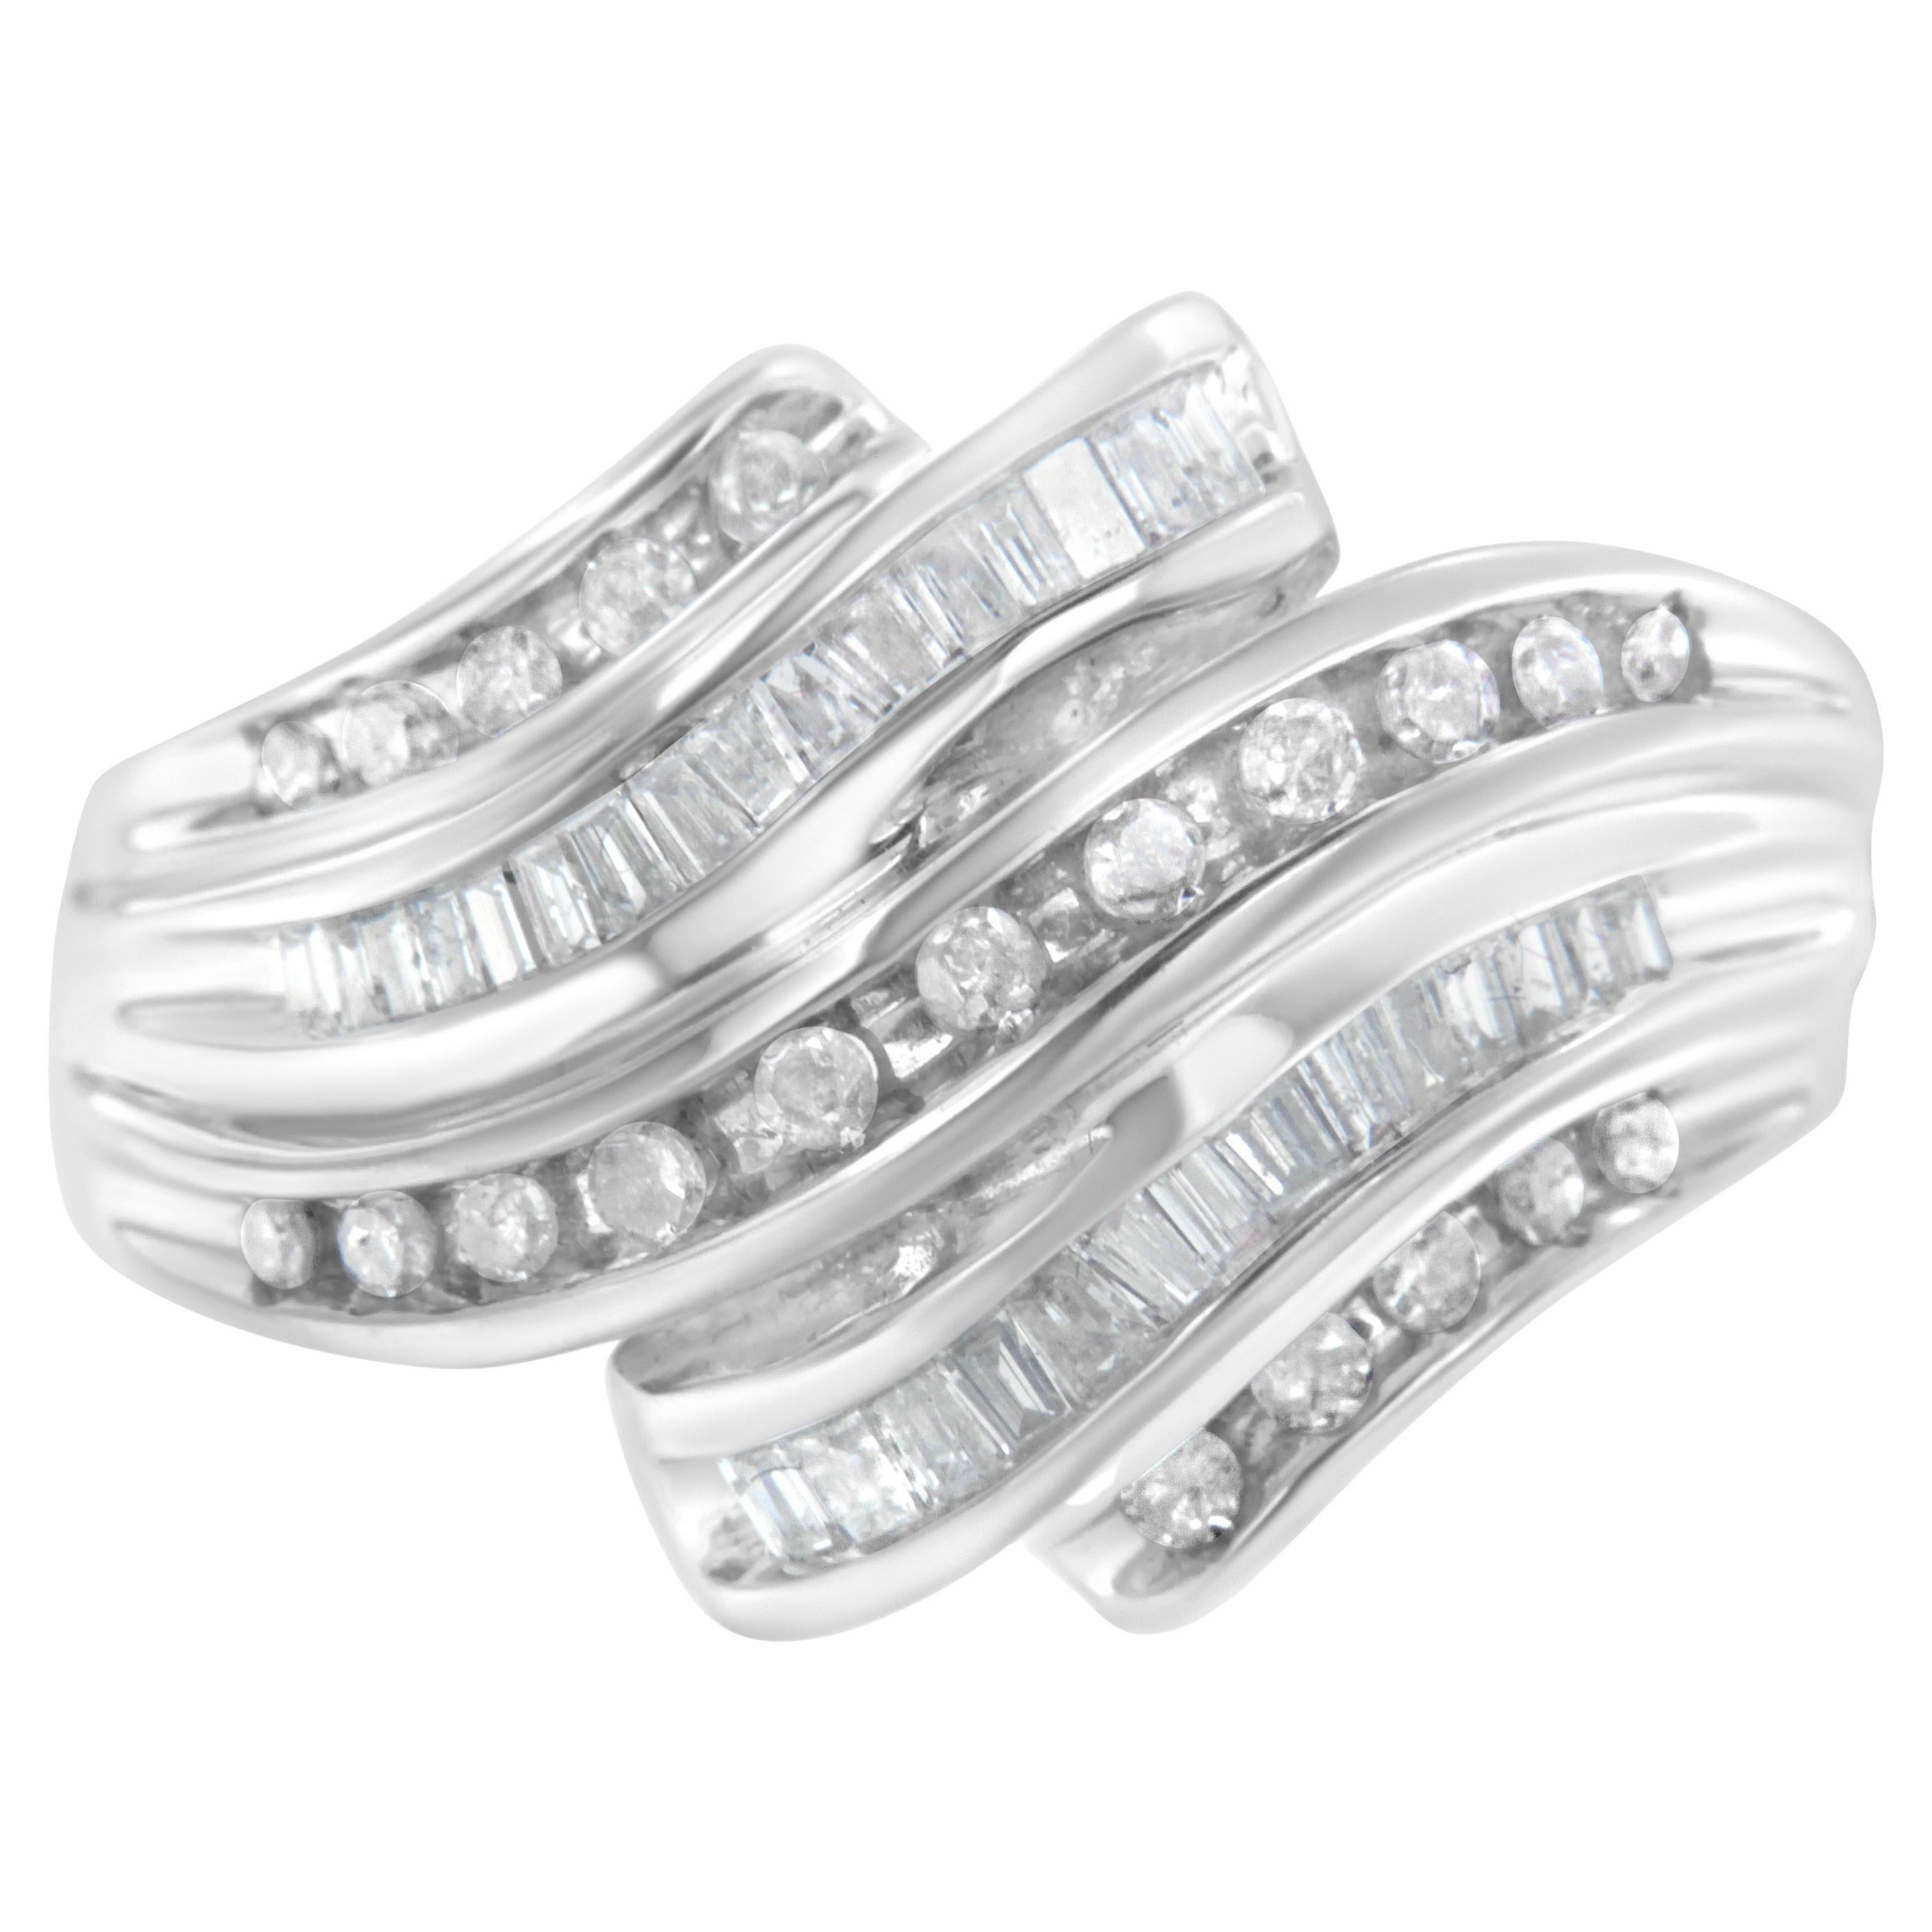 10K White Gold Round and Baguette Cut 3/4 Carat Diamond Channel Ring